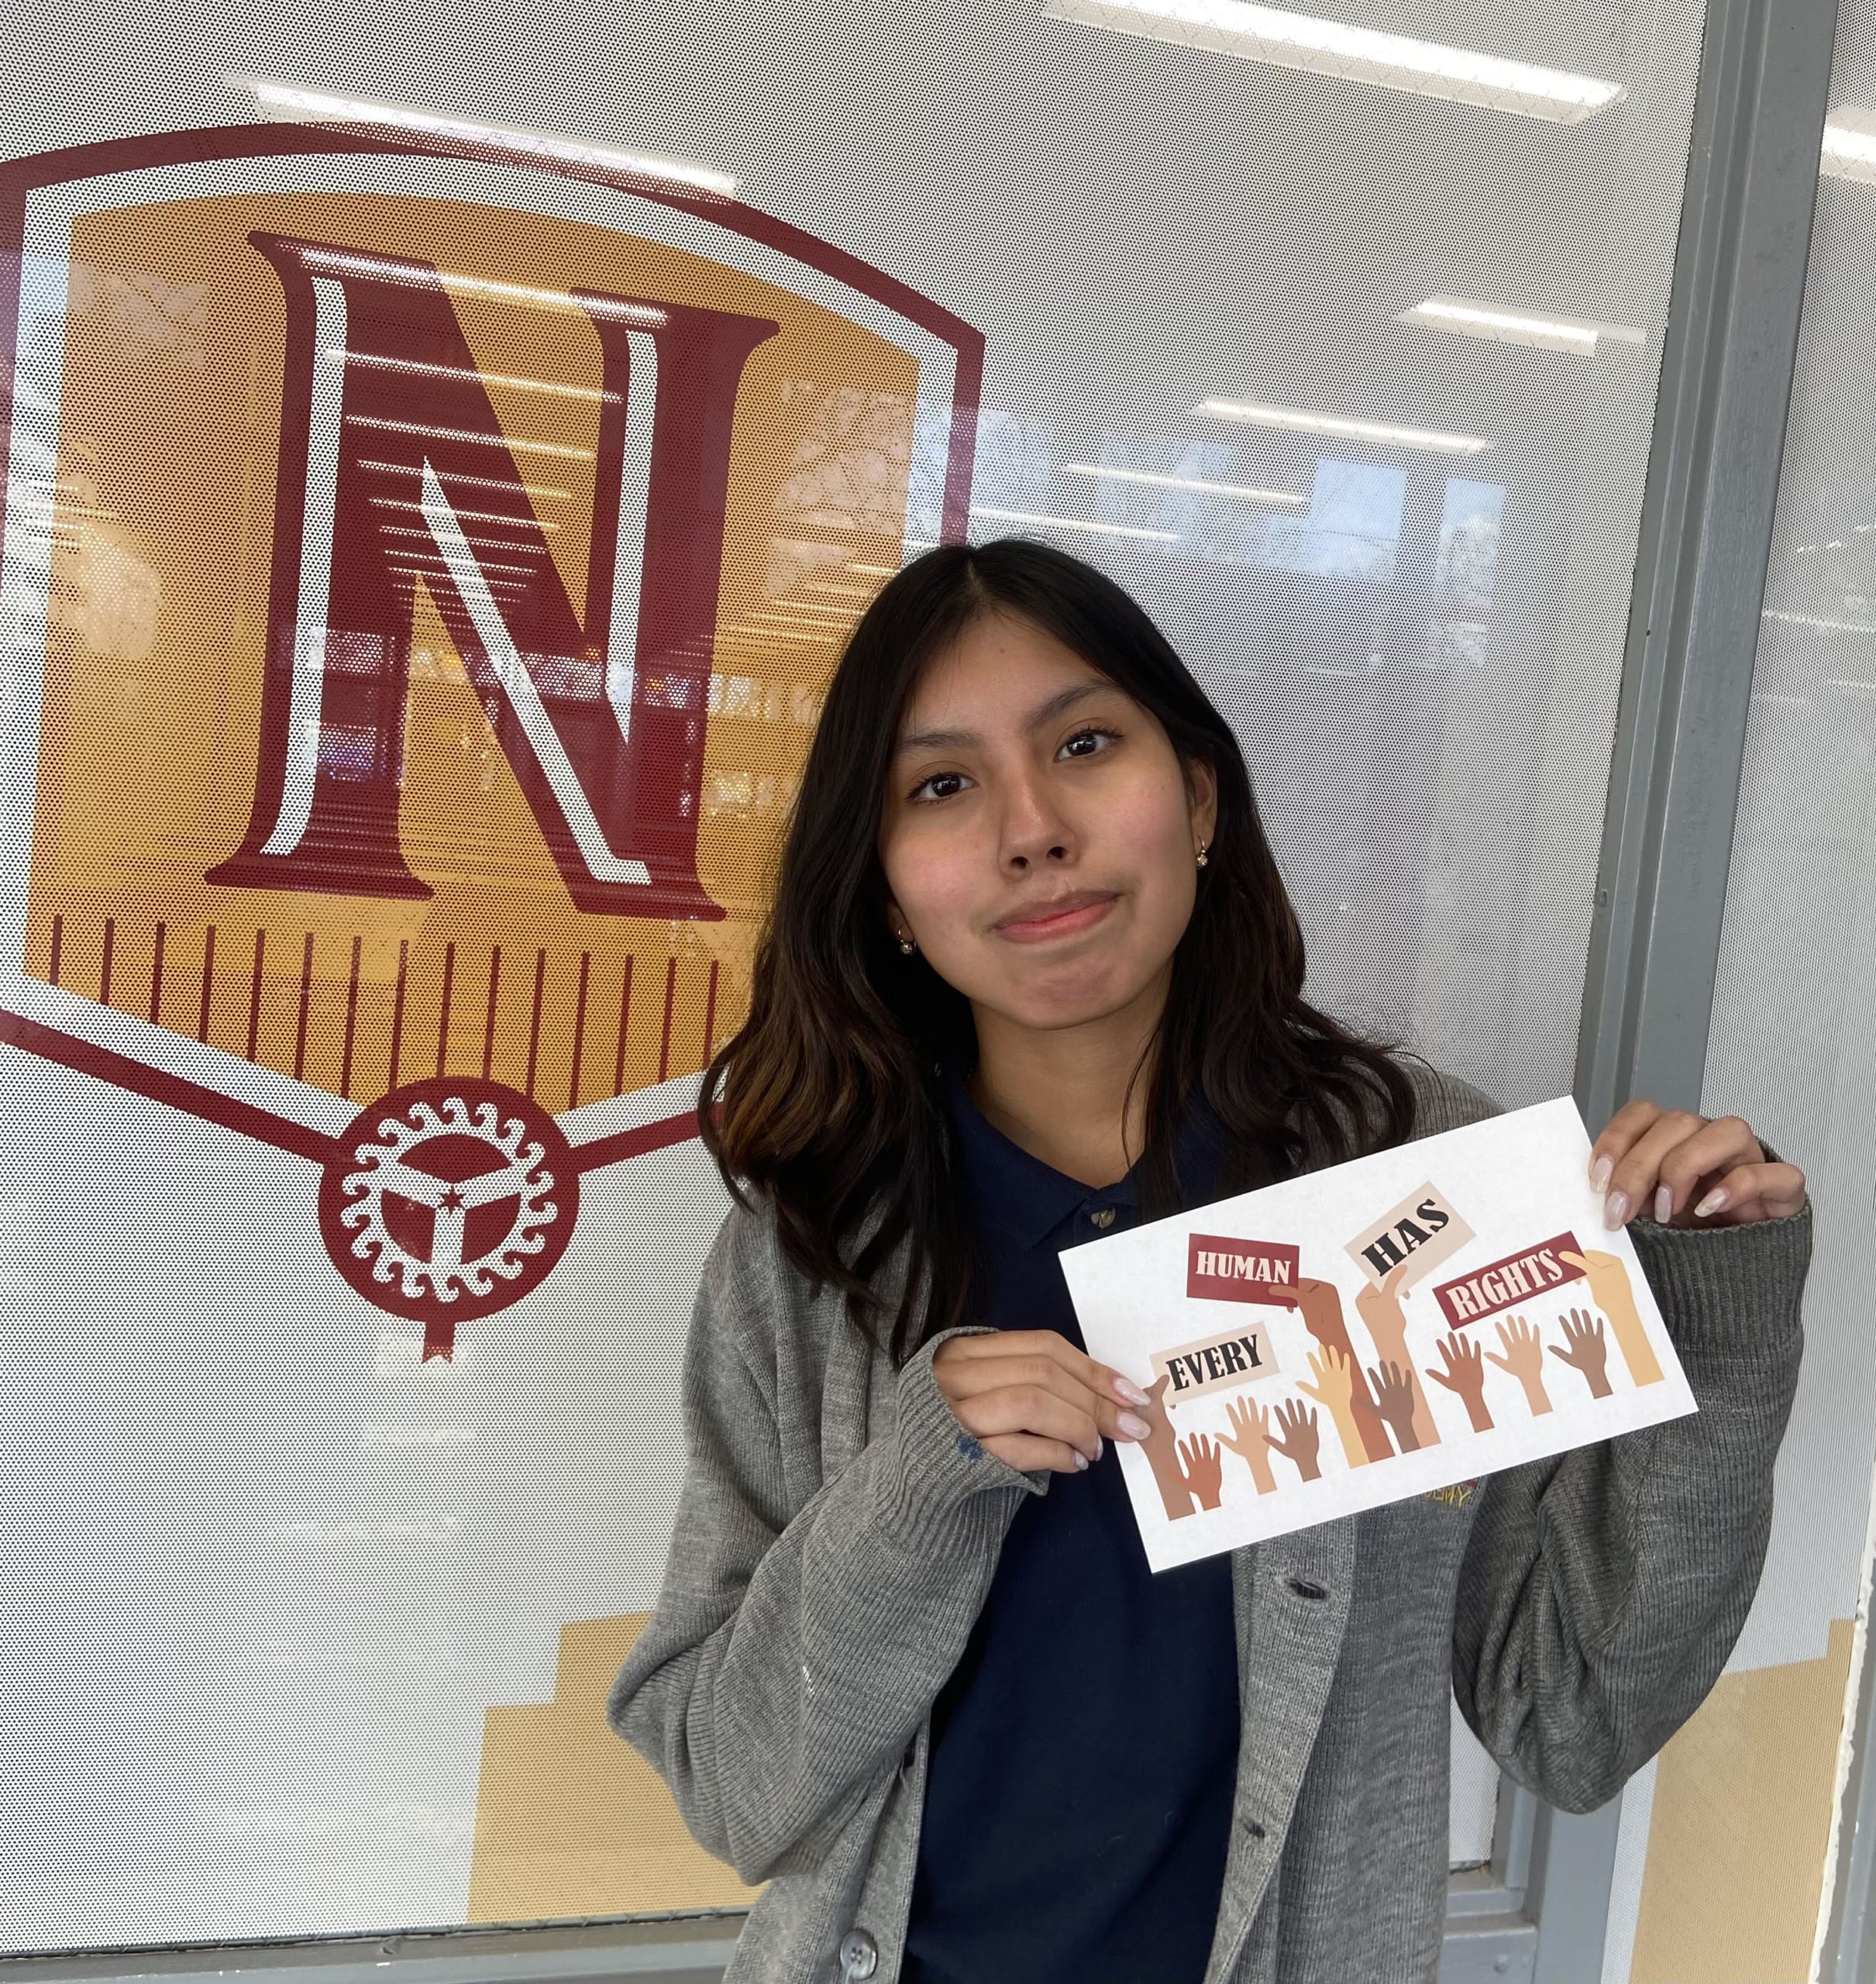 Image shows The Noble Academy student Leslie Caguana posing in front of a decal of The Noble Academy logo. She is holding a small white sign that has hands of all colors that are holding up mini signs that read "Every Human Has Rights"